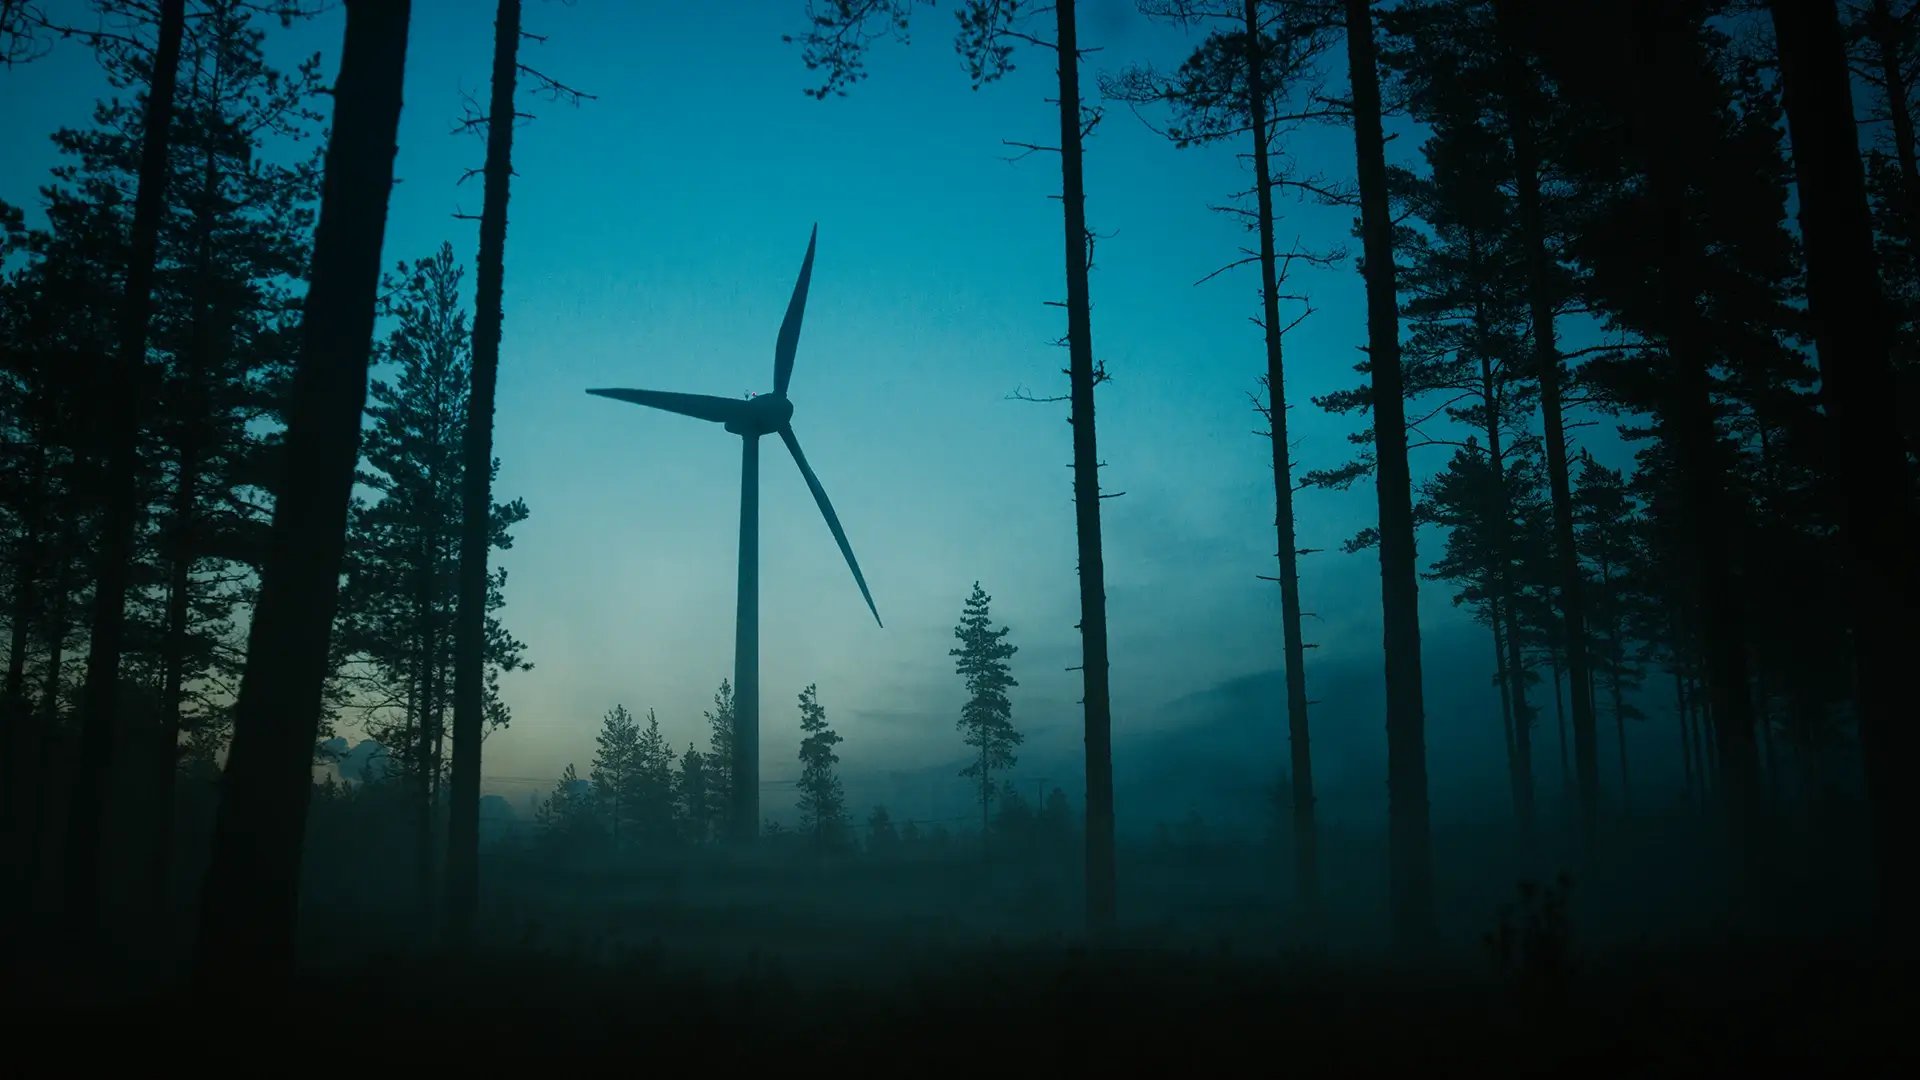 Green energy with wind turbine towering over nature in mist